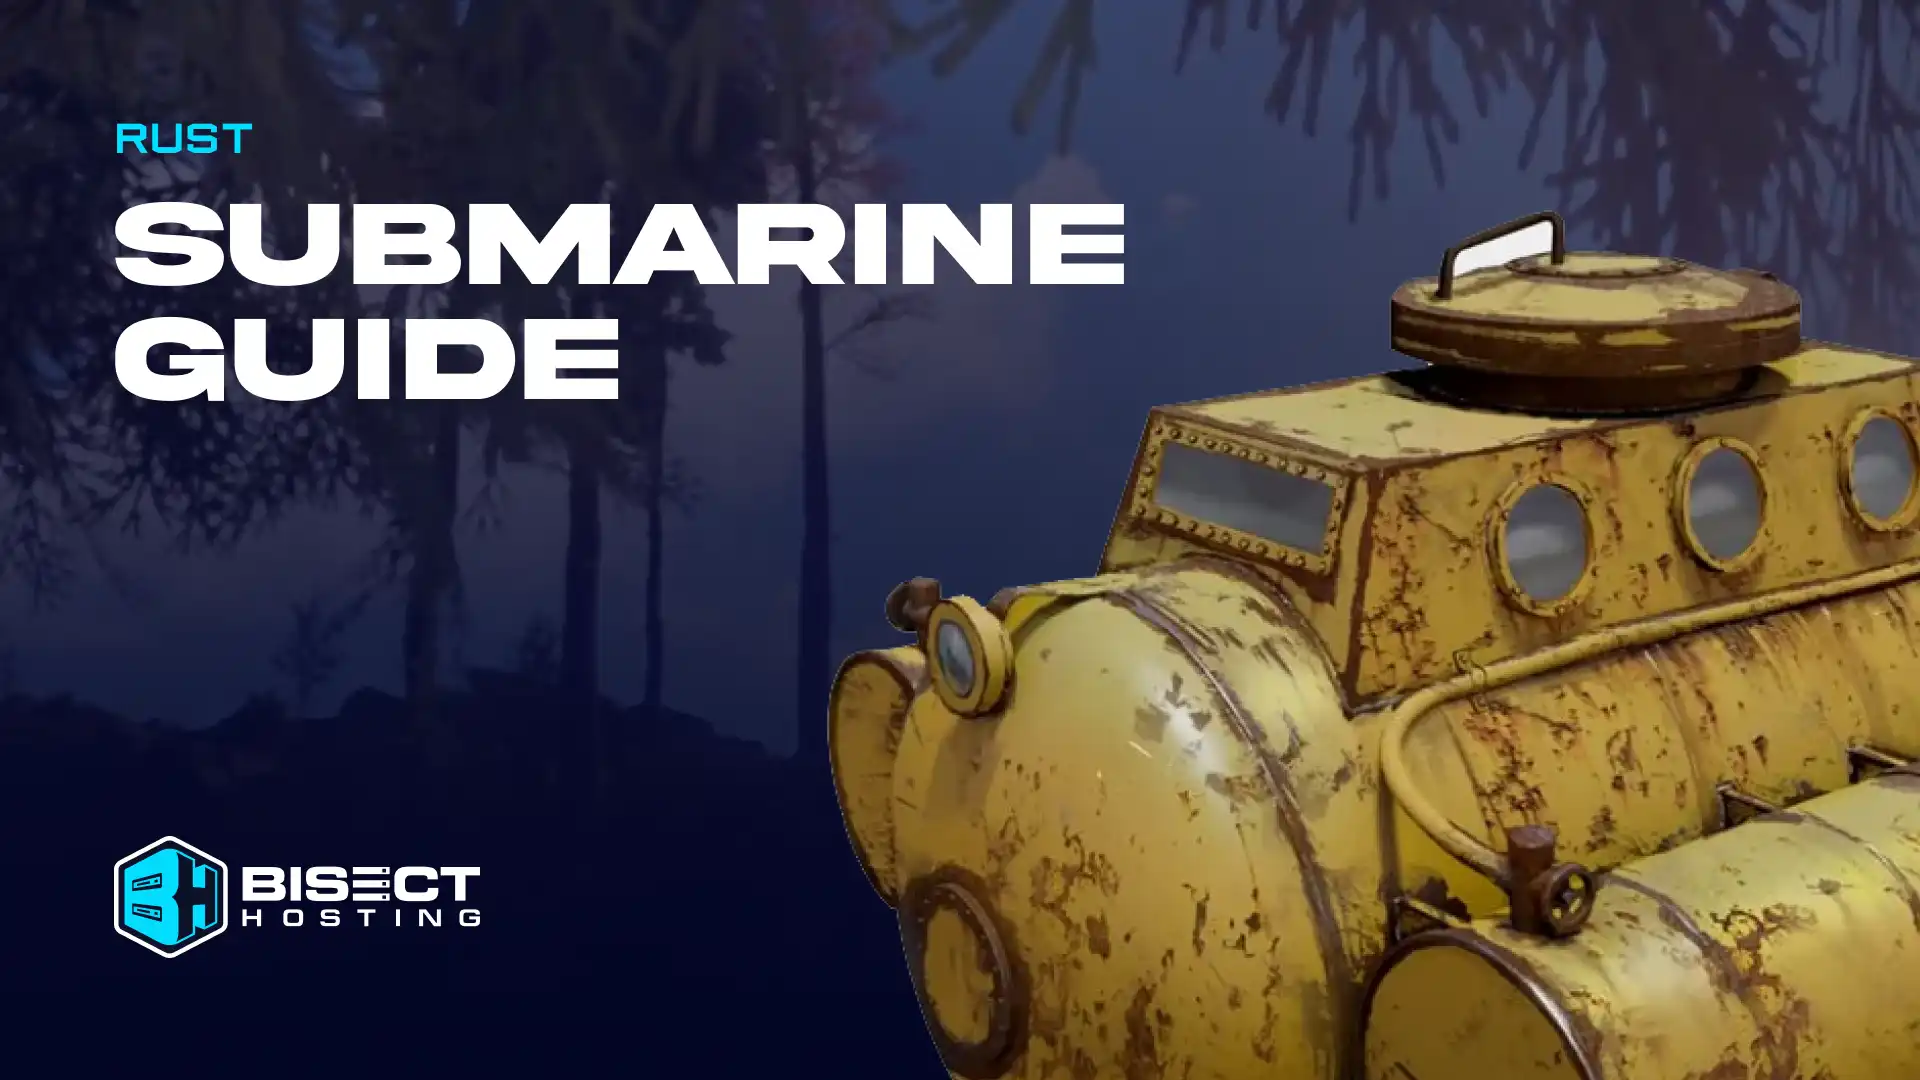 Rust Submarine Guide: How to Get, Stats, Controls, & More